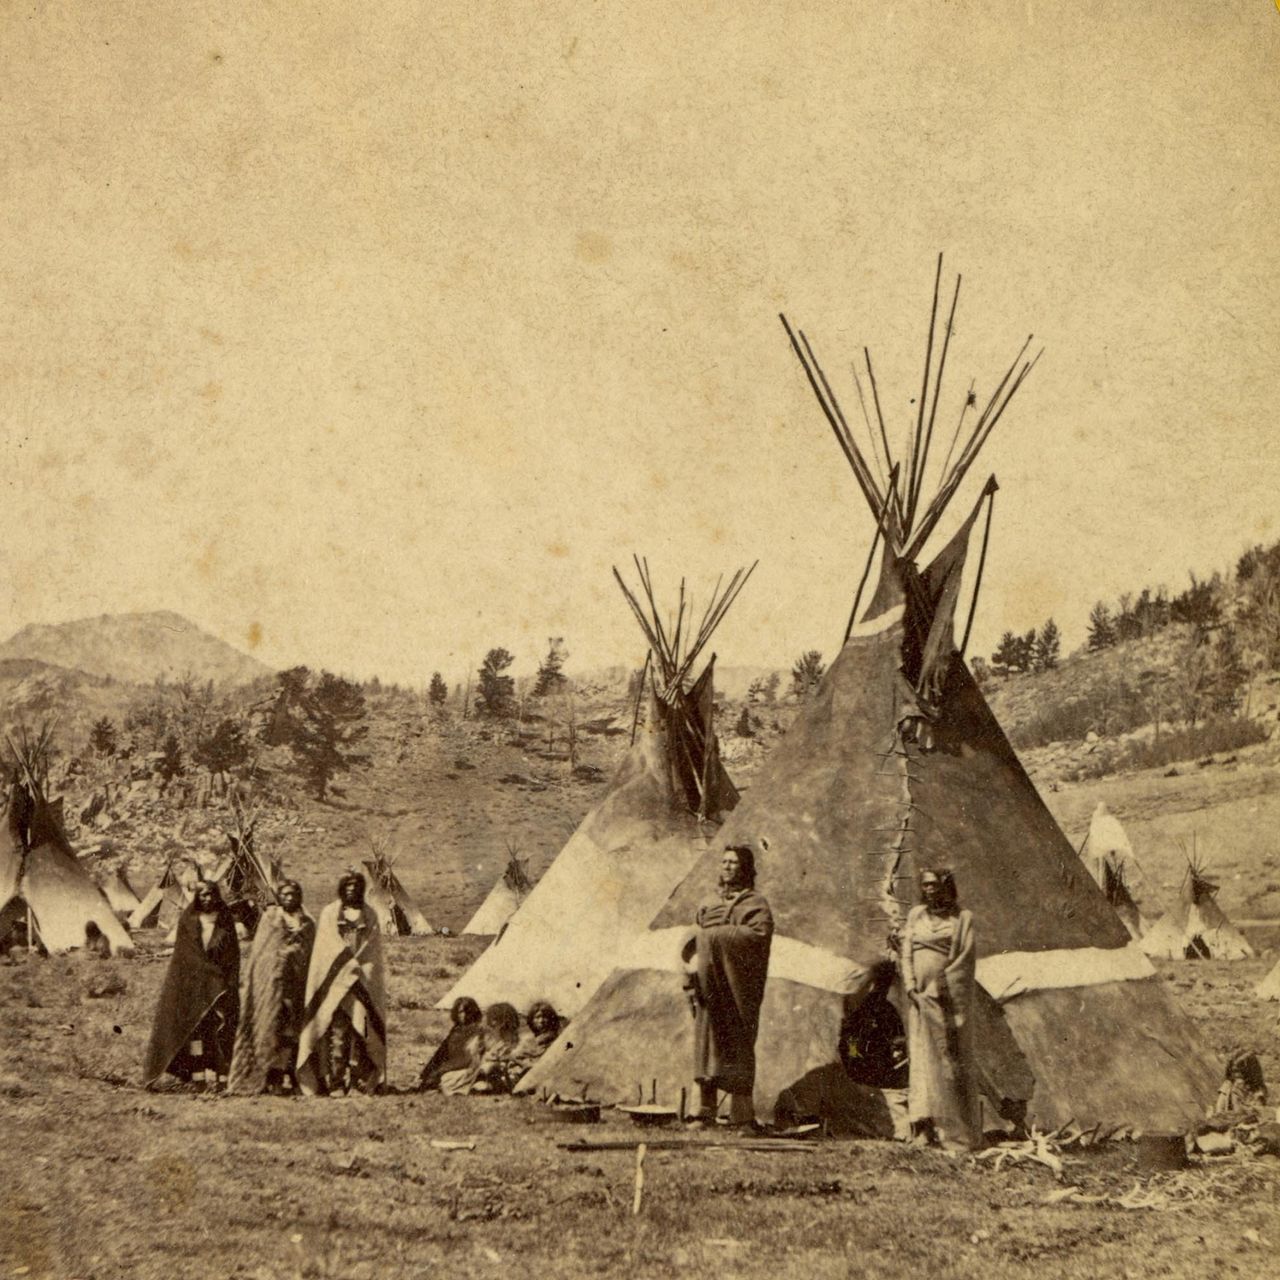 Tent of Chief Washake of the Shoshone, Wind River Mountains, ca. 1870.